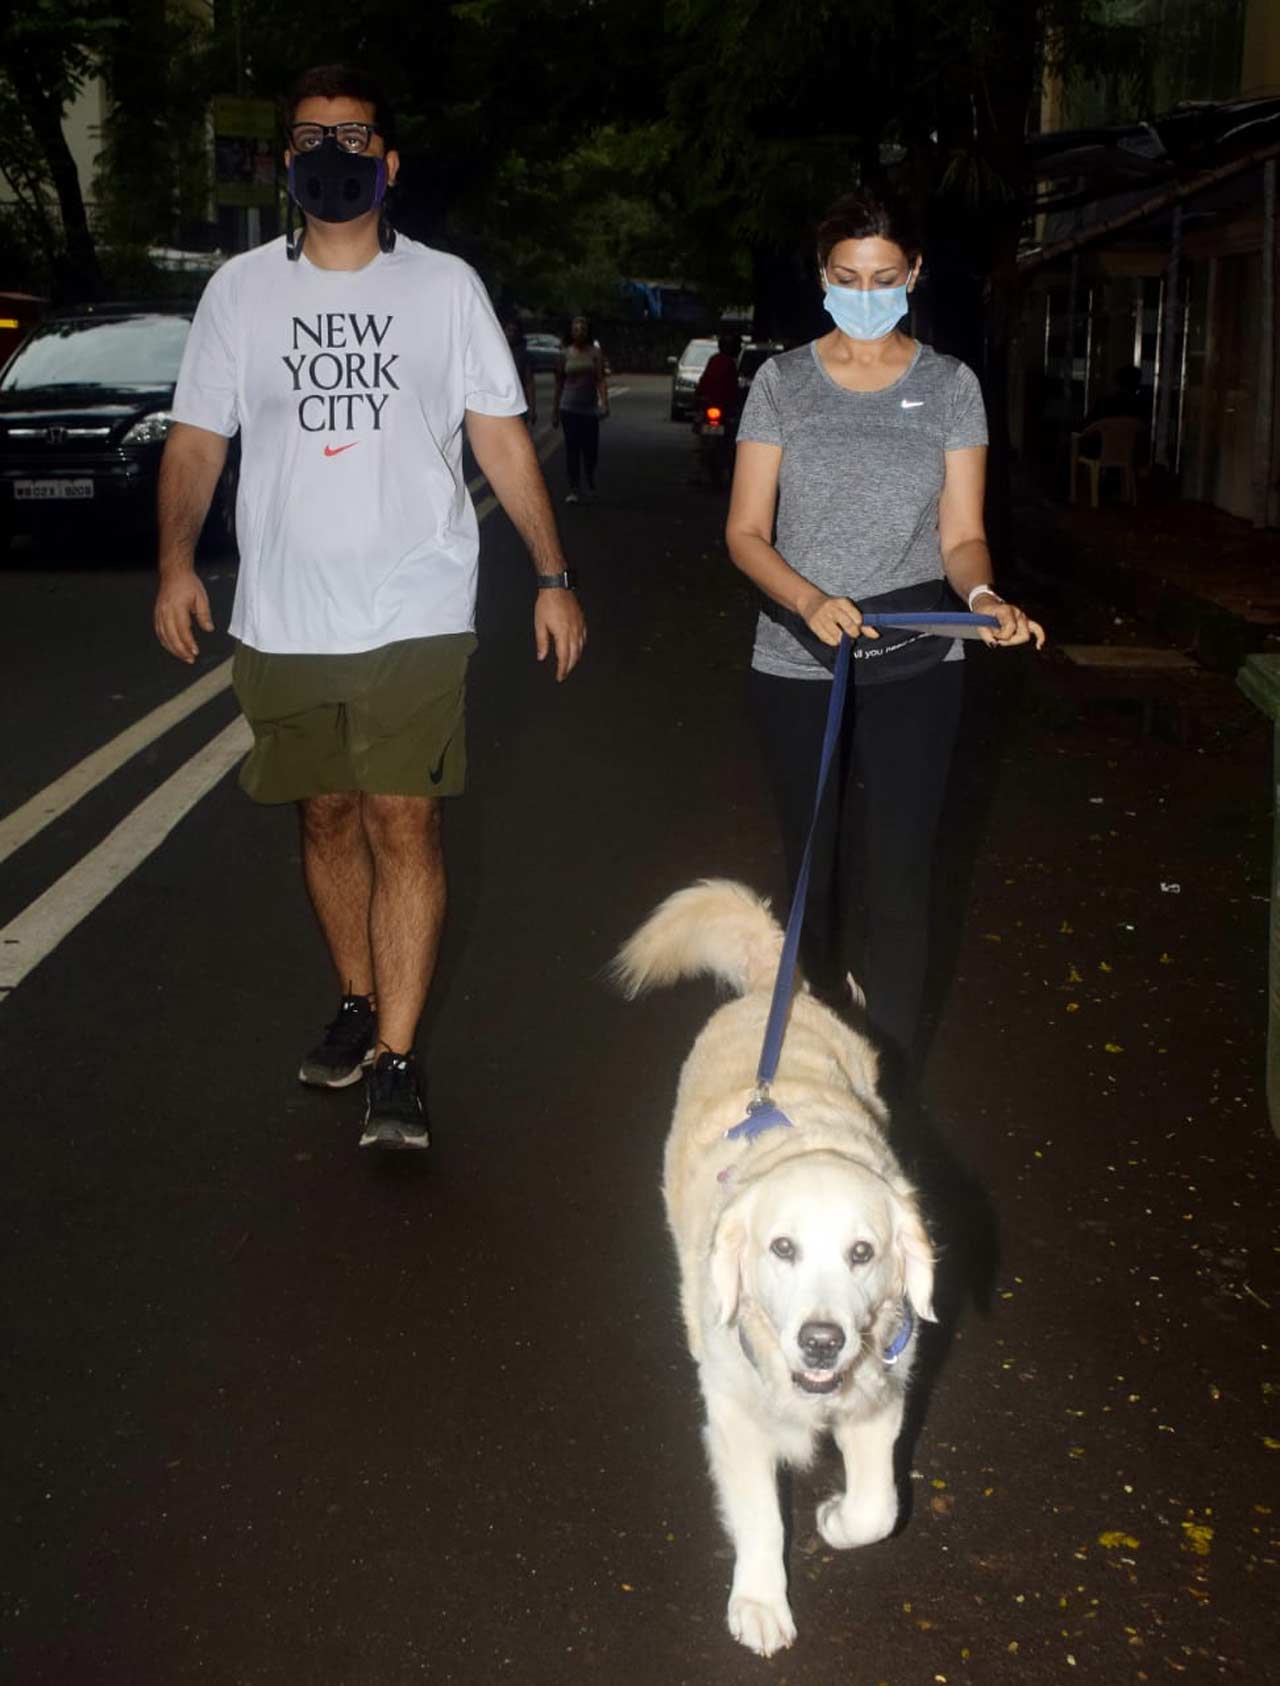 Sonali Bendre and Goldie Behl were out walking their pet on the streets of Bandra, Mumbai.